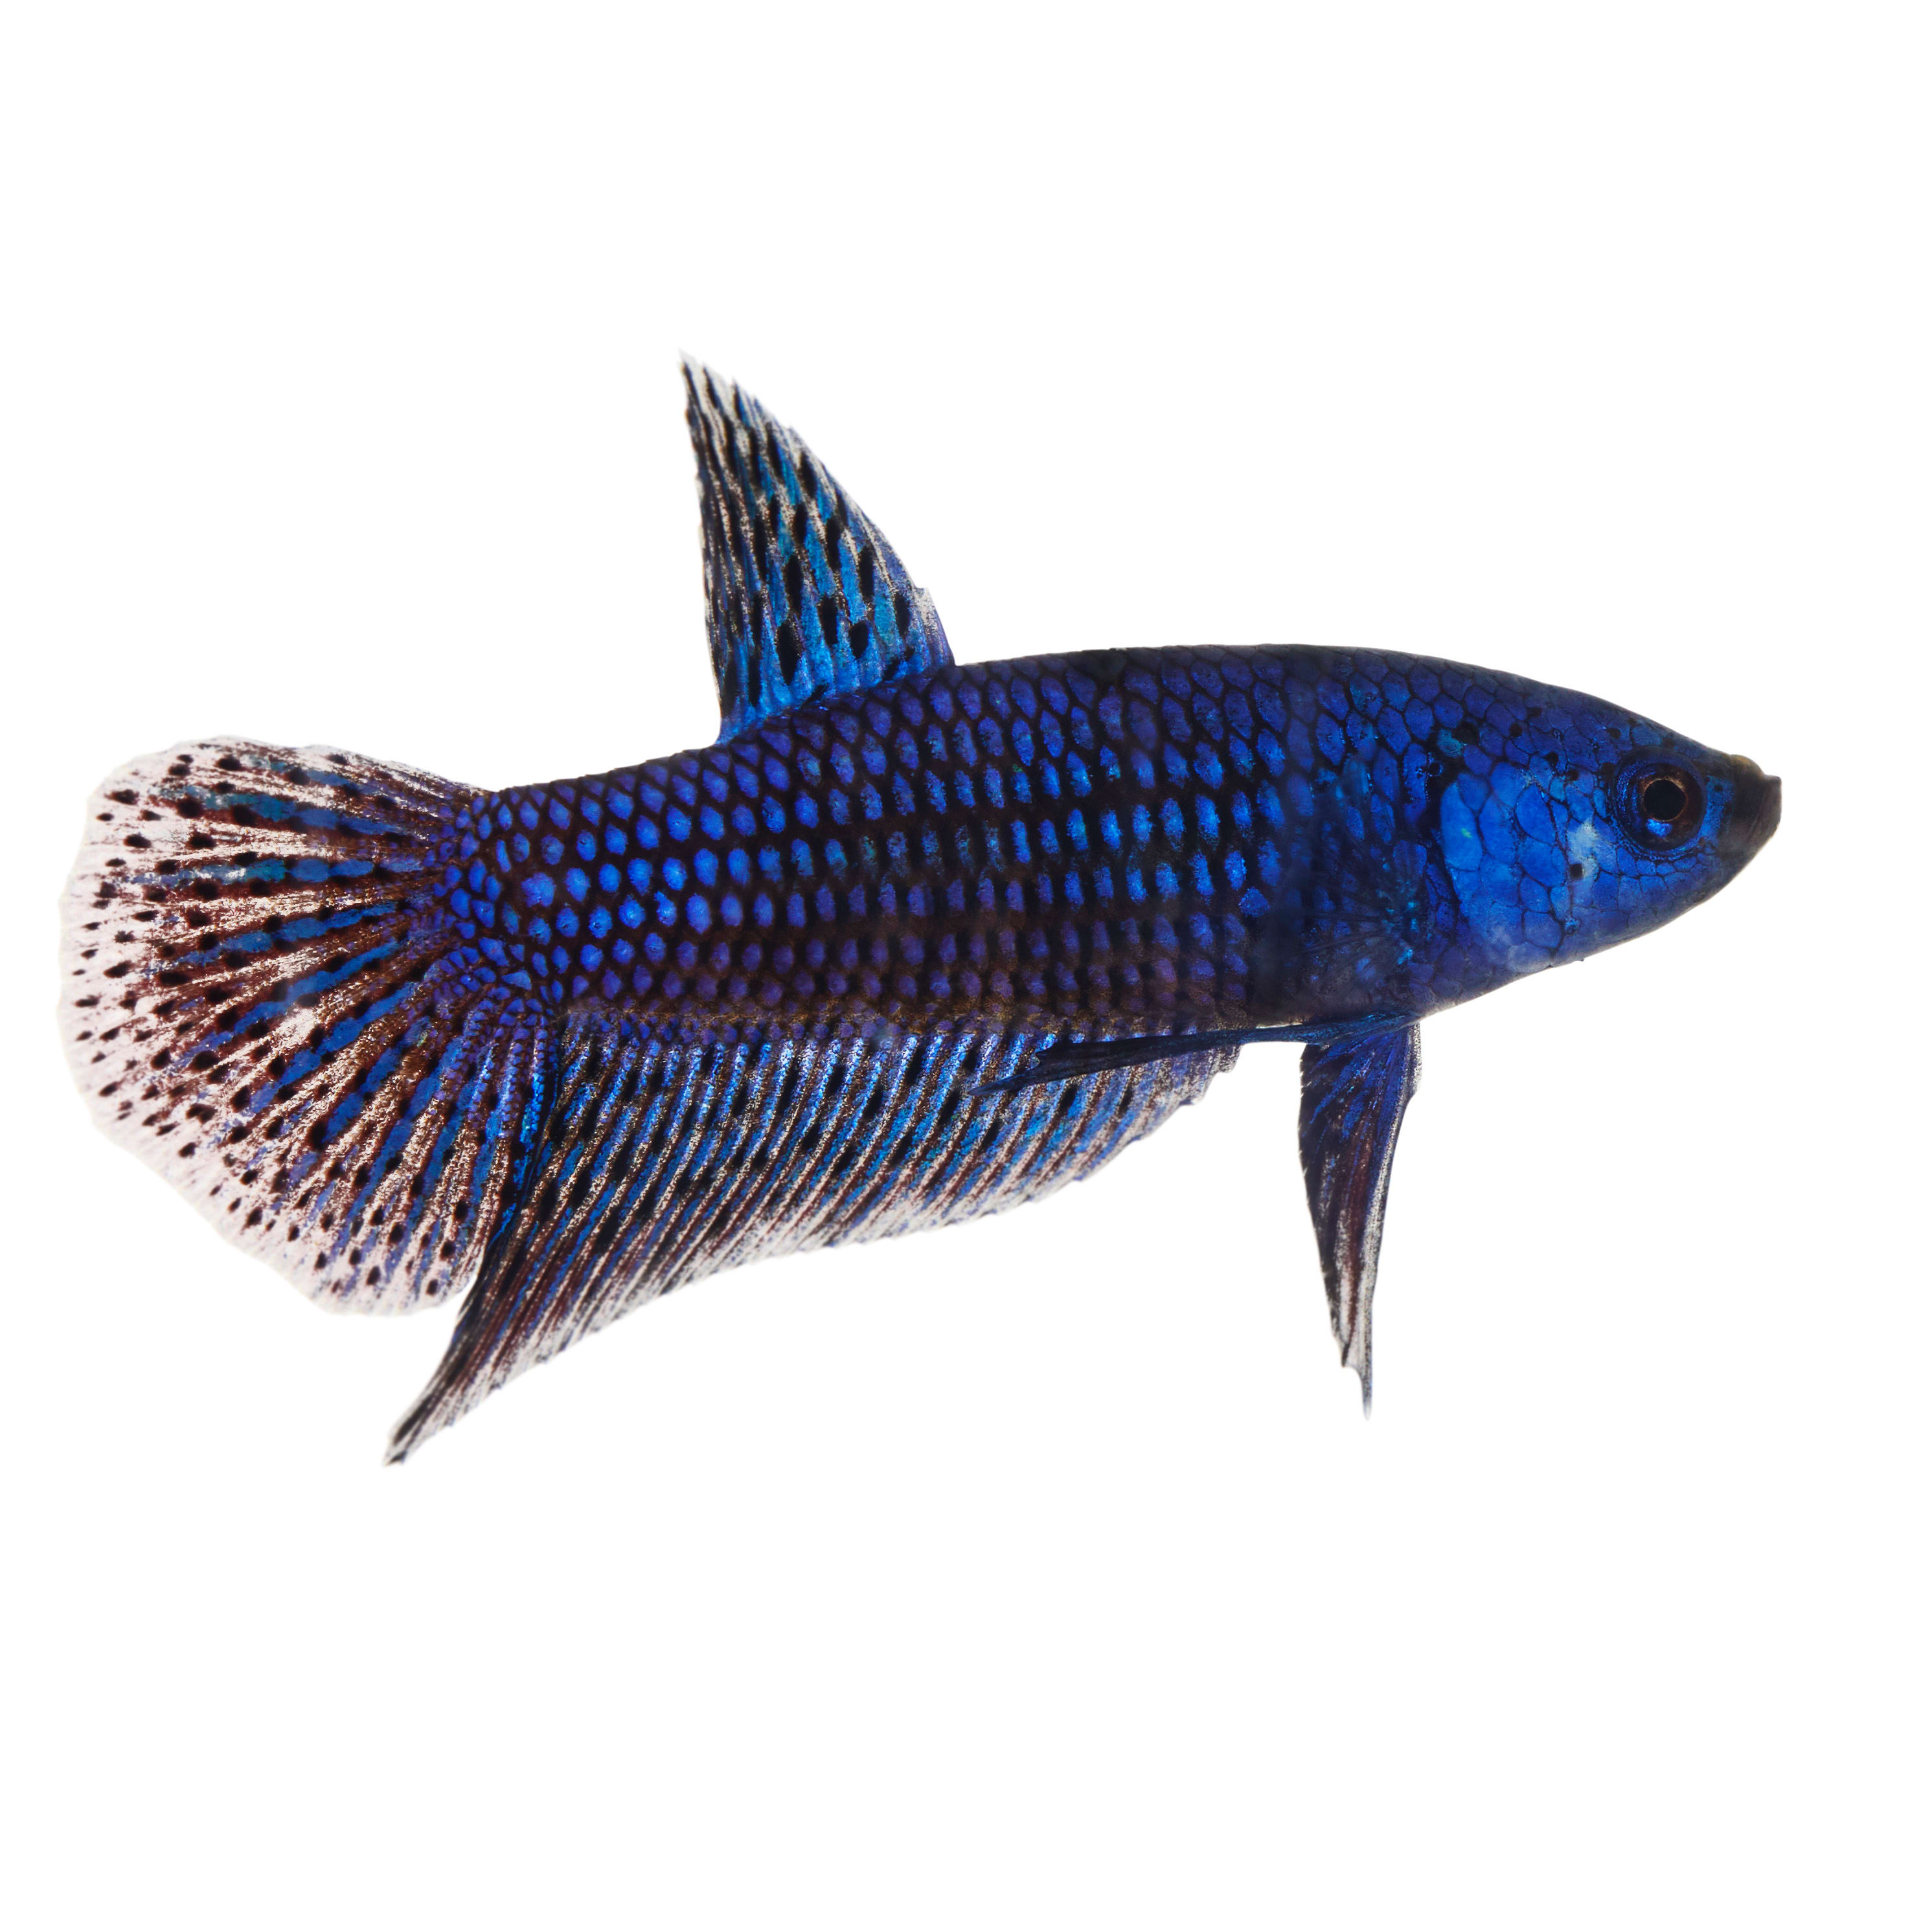 What You Need to Know About Buying Betta Fish at Petco? 2